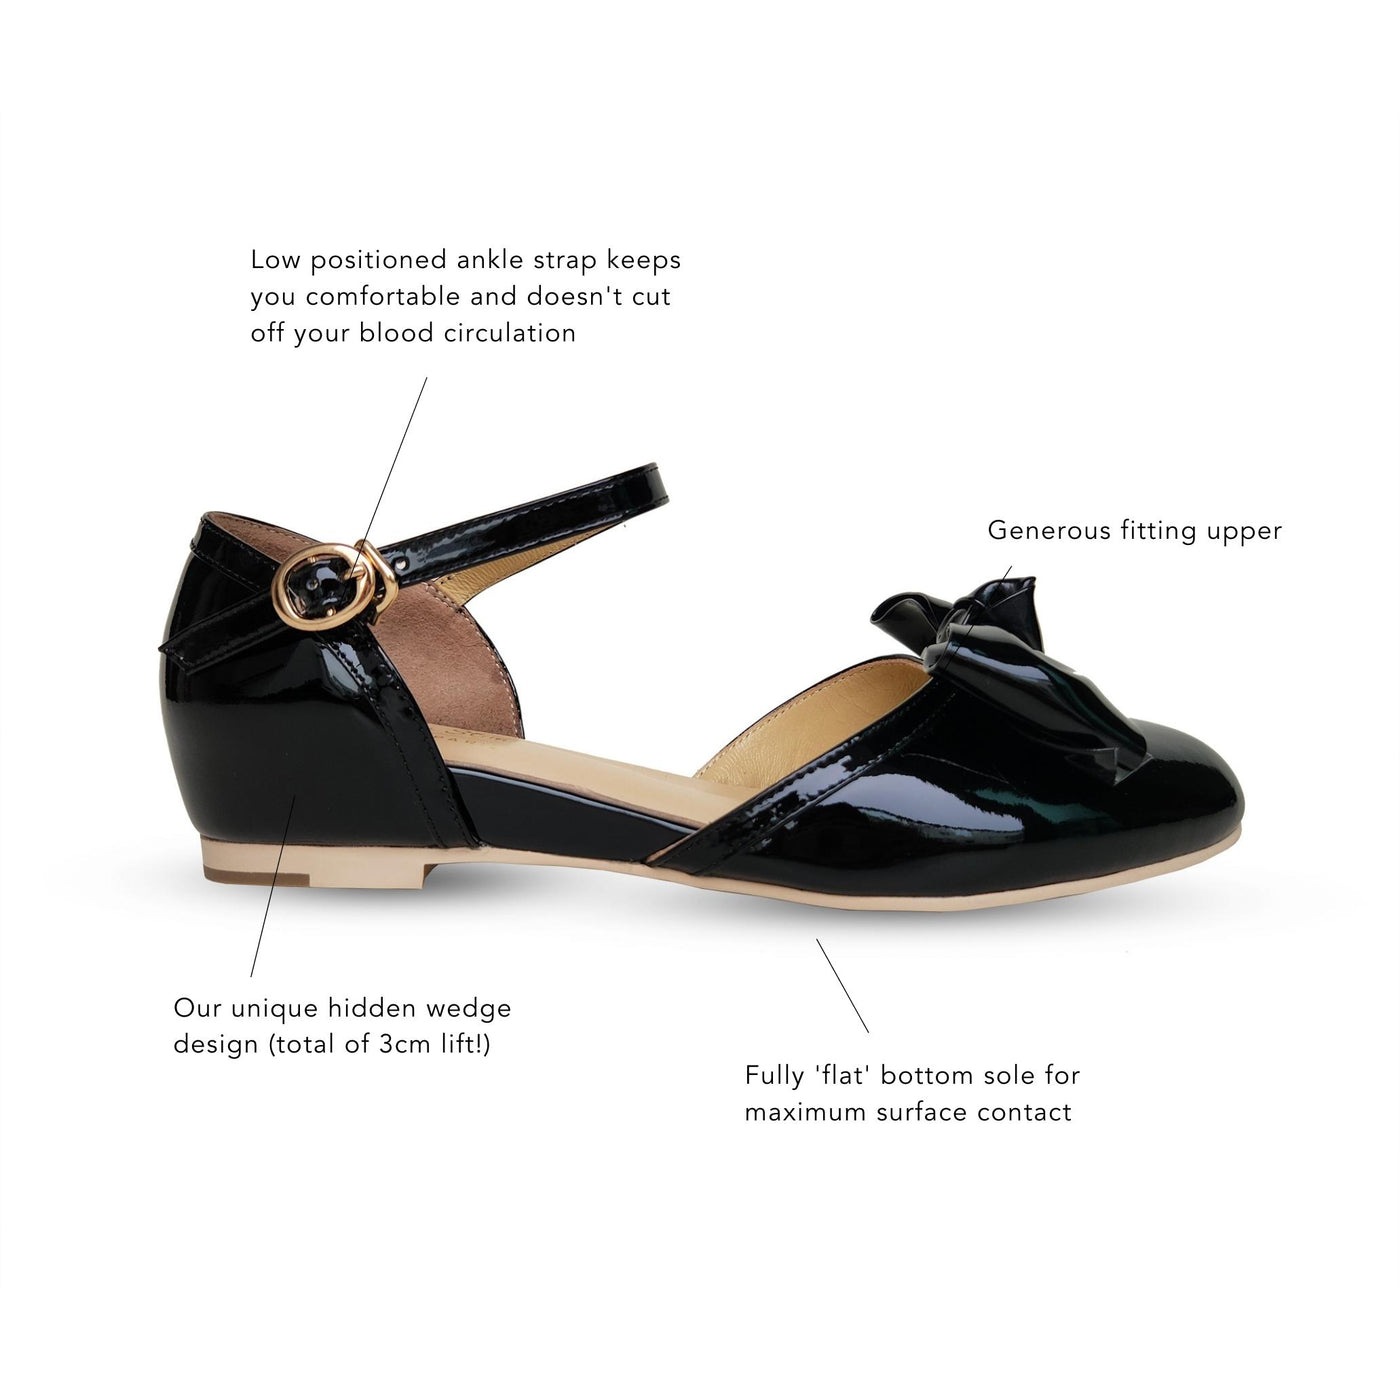 1950's Vintage French Parisian inspired flats in black patent leather with large patent bow retro flats with hidden wedge designed by Alba in Paris